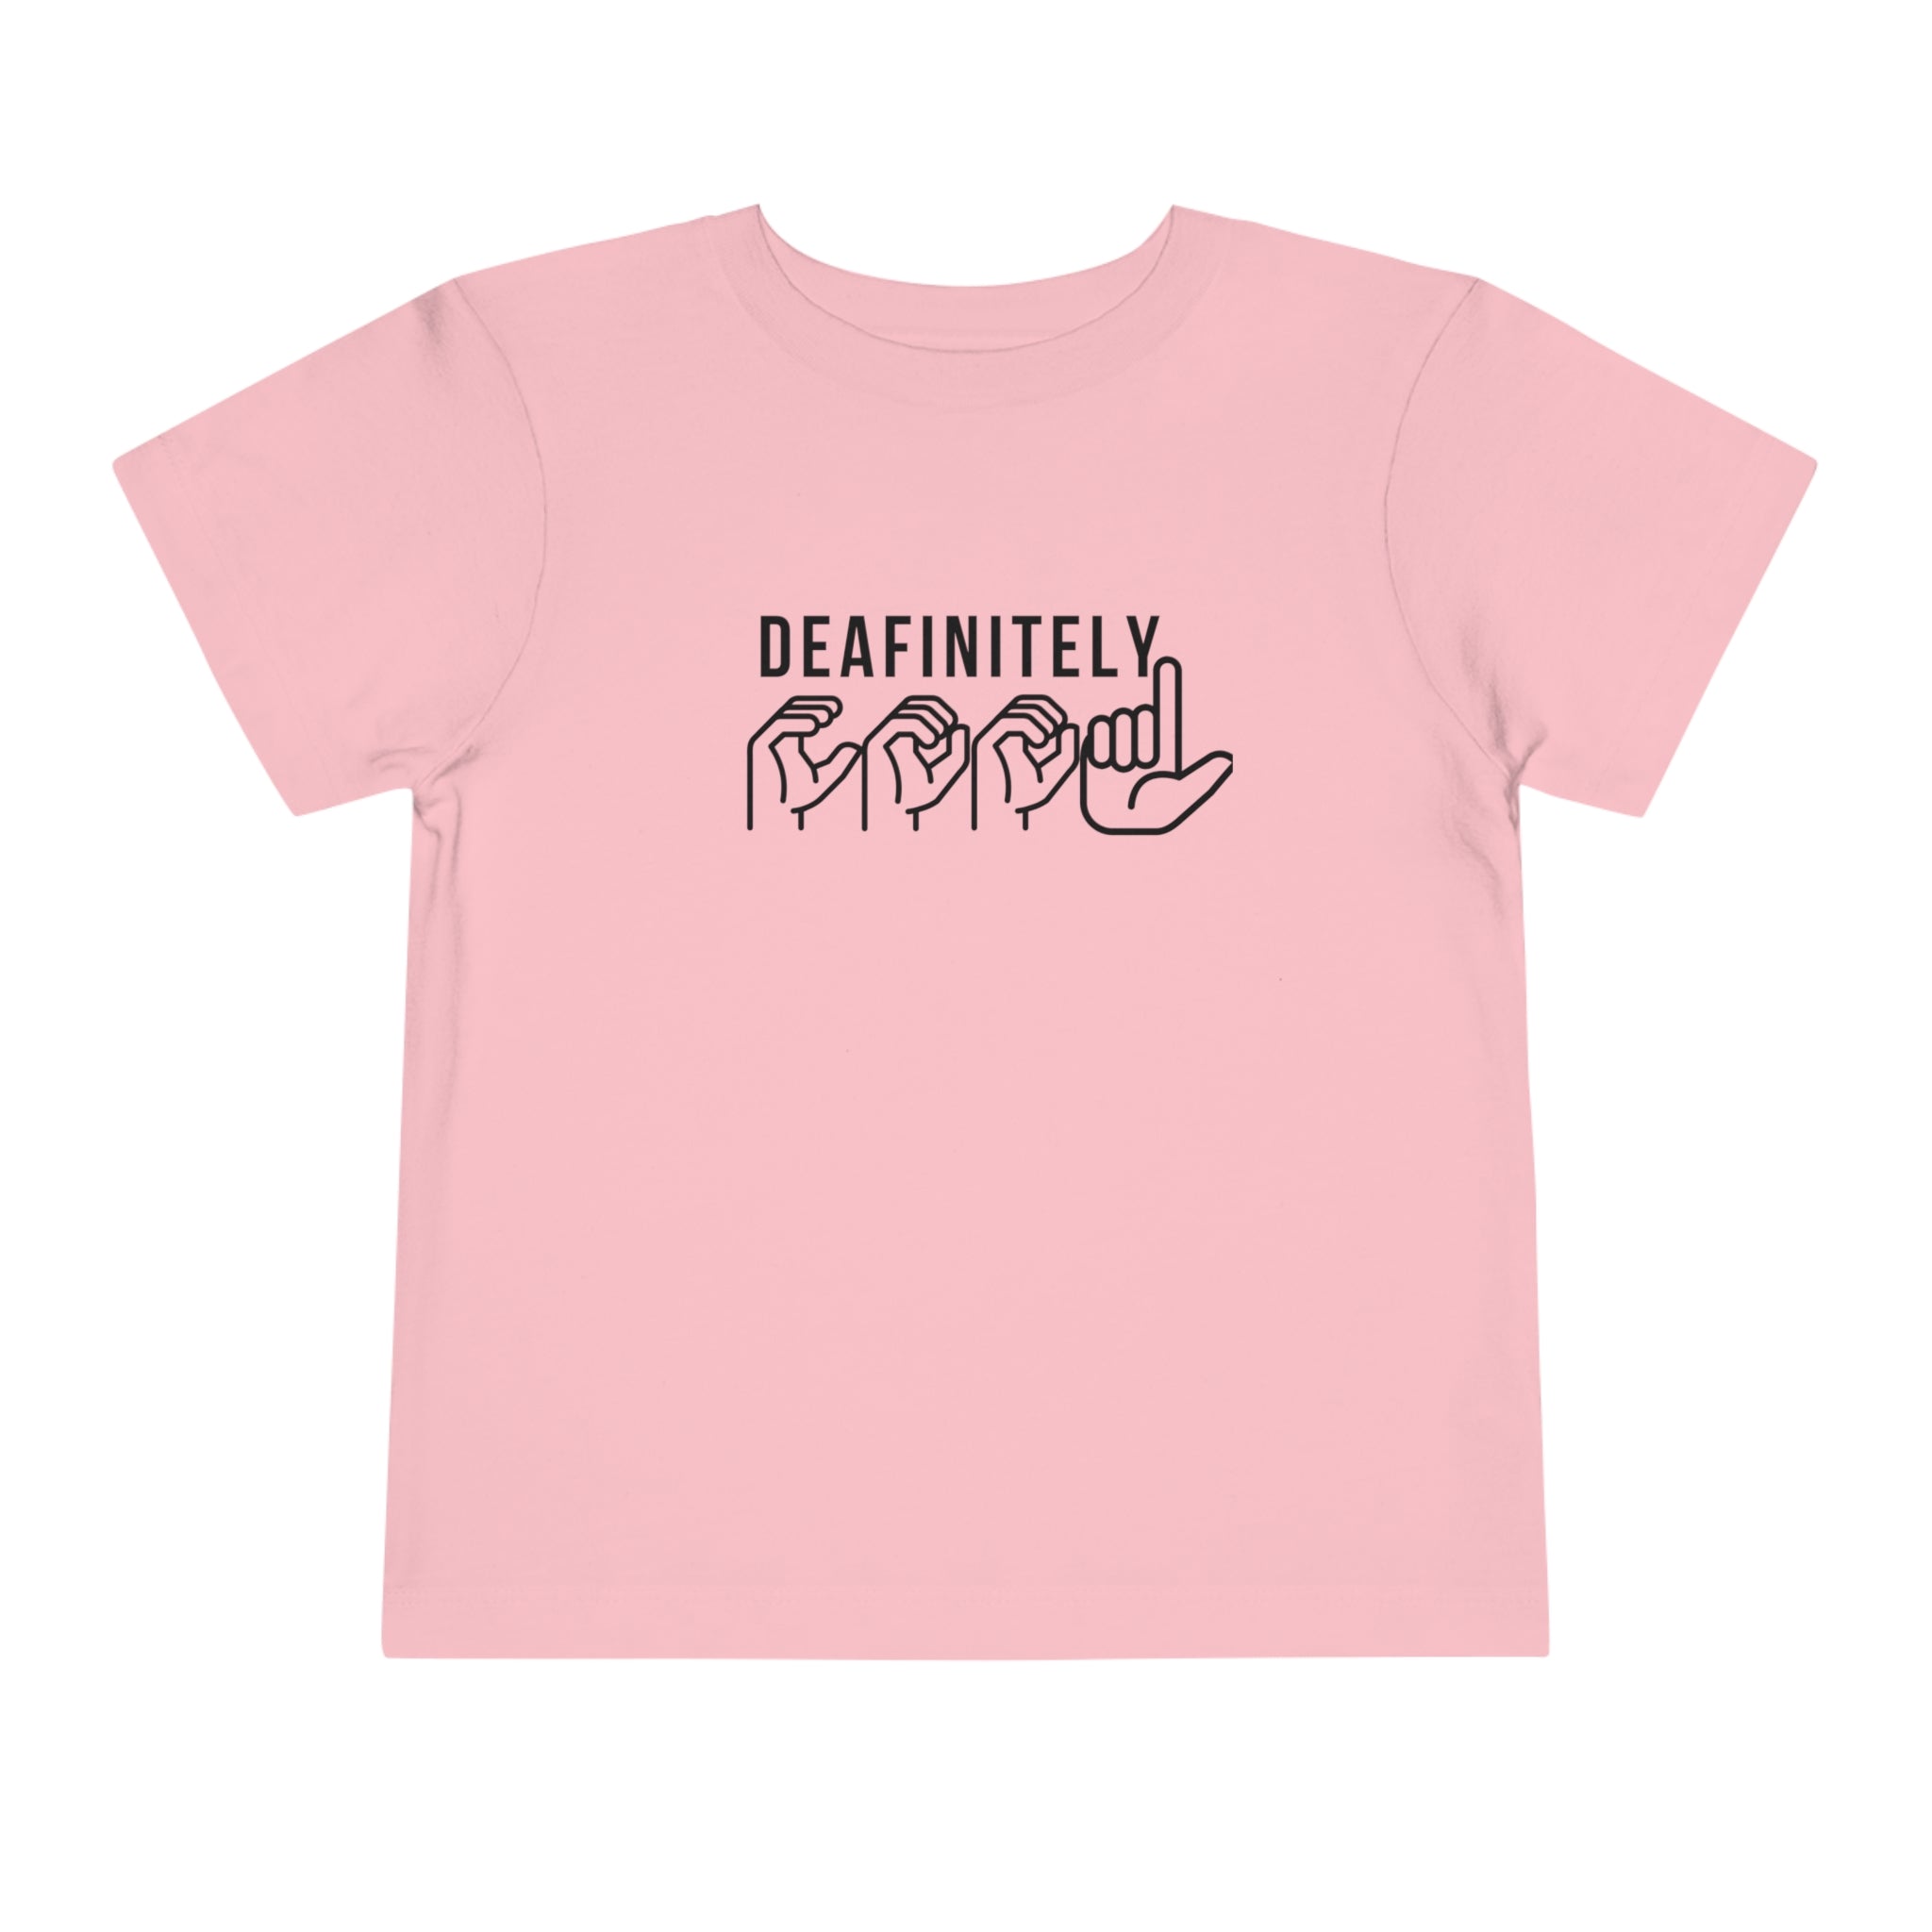 Deafinitely Cool Toddler Unisex Short Sleeve Tee - The Kindness Cause